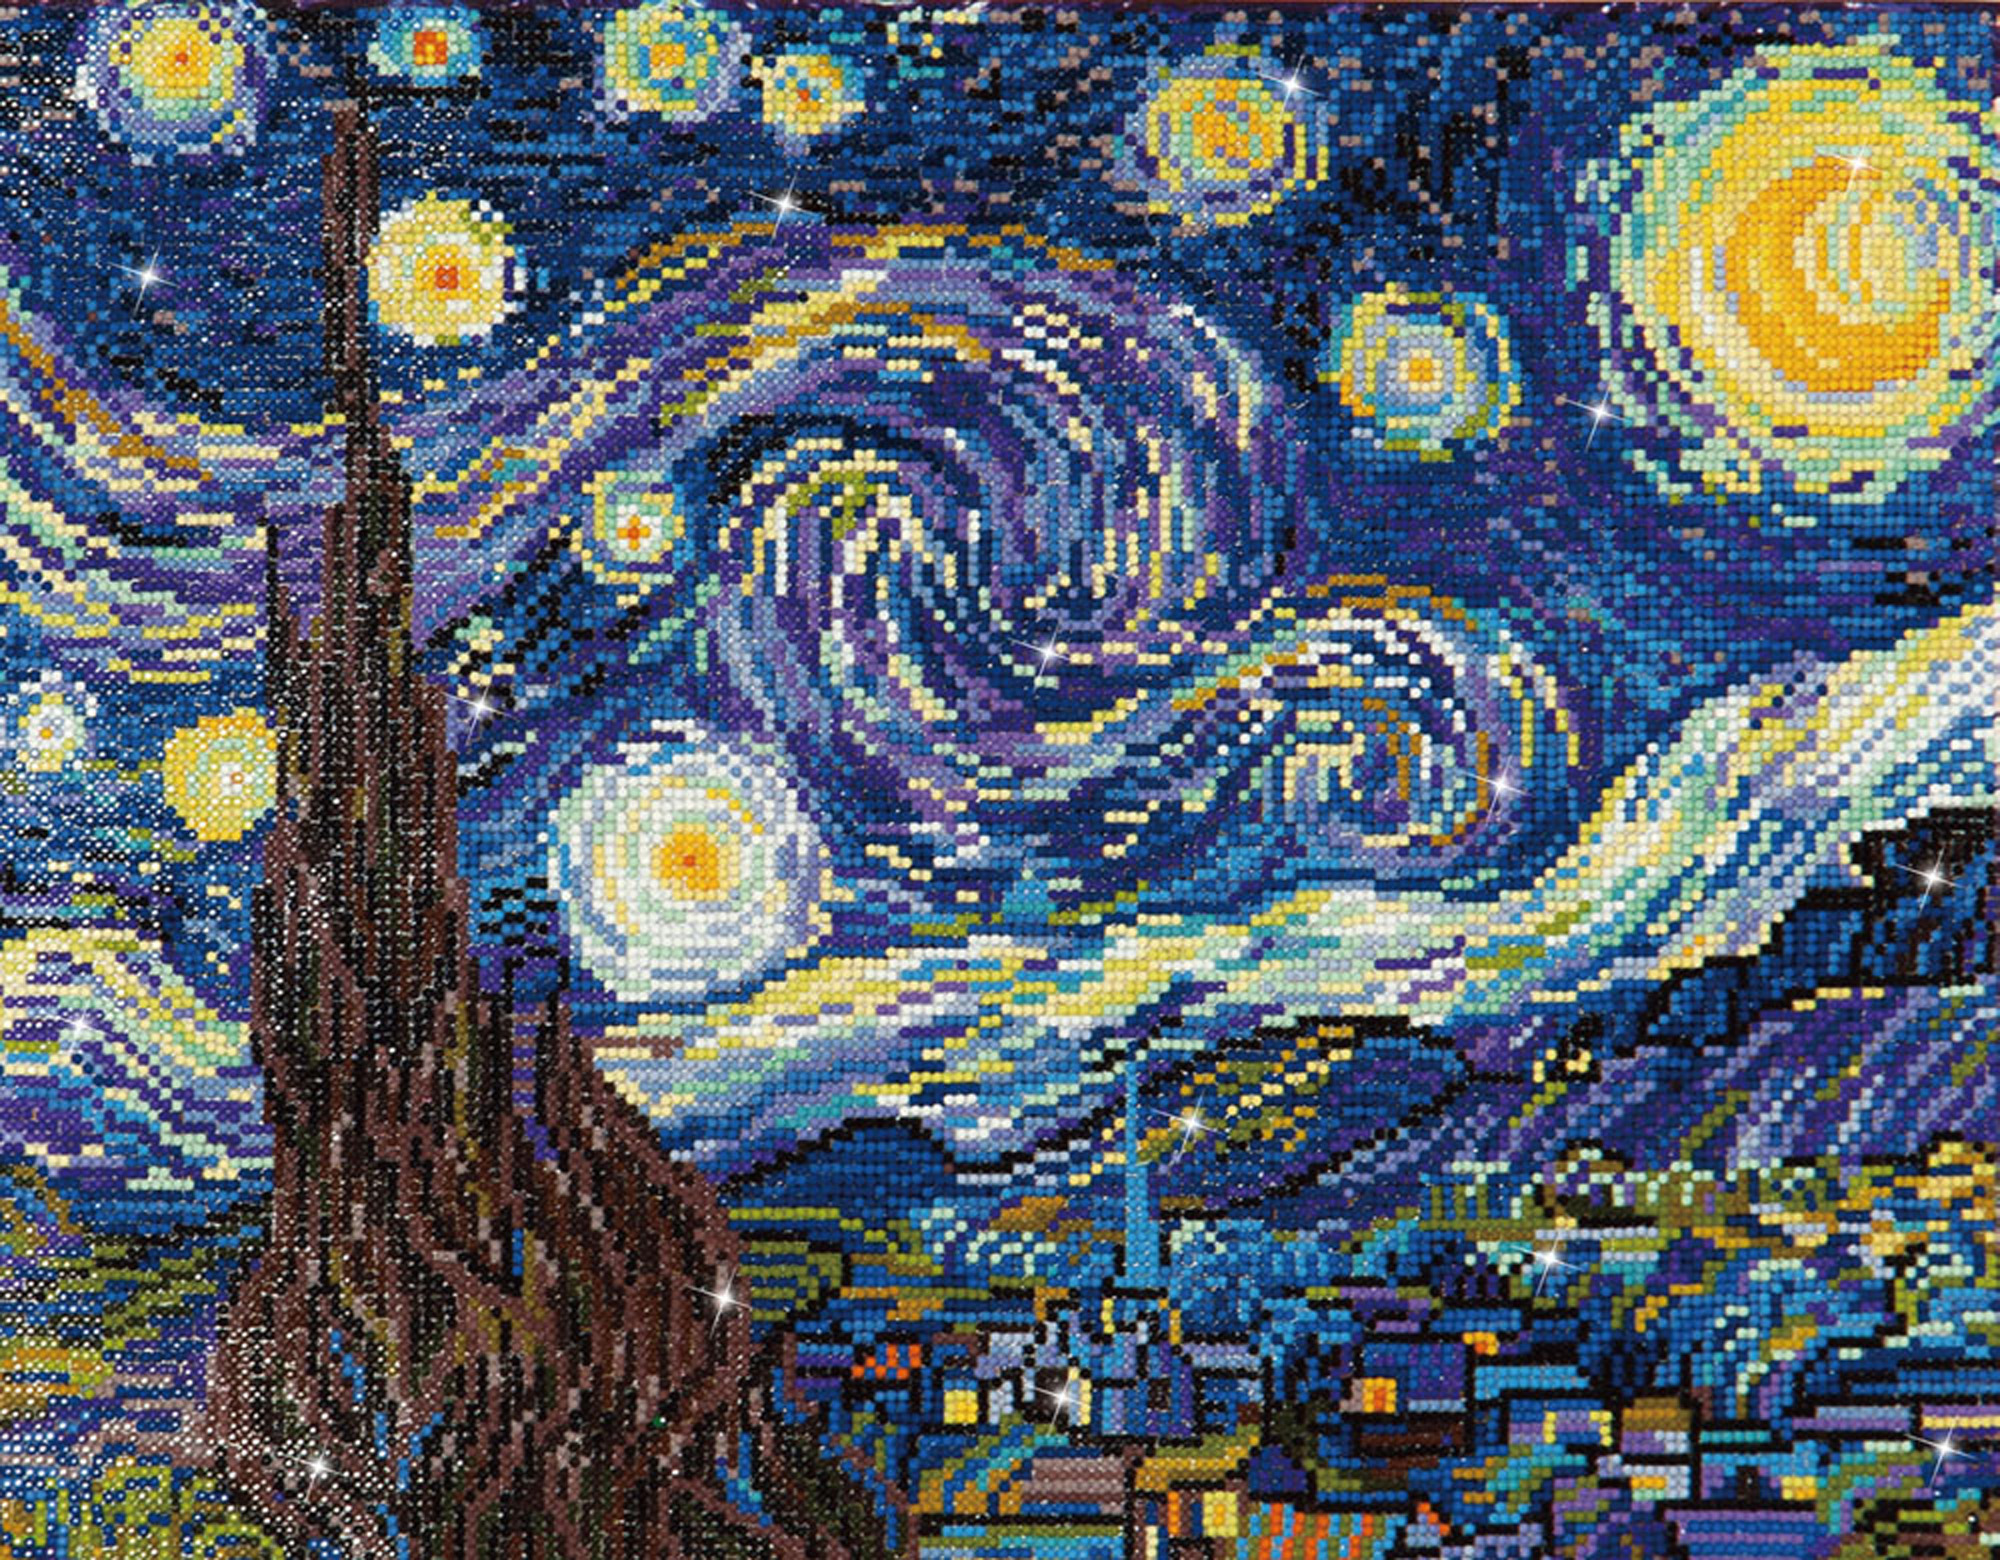  Diamond Painting Kits for Adults, Big Size 16x20 Extra Large  5D Full Drill Diamond Mosaic Paintings DIY, Van Gogh's Starry Night Series  Paintings for Home Wall Decor (The Starry Night)